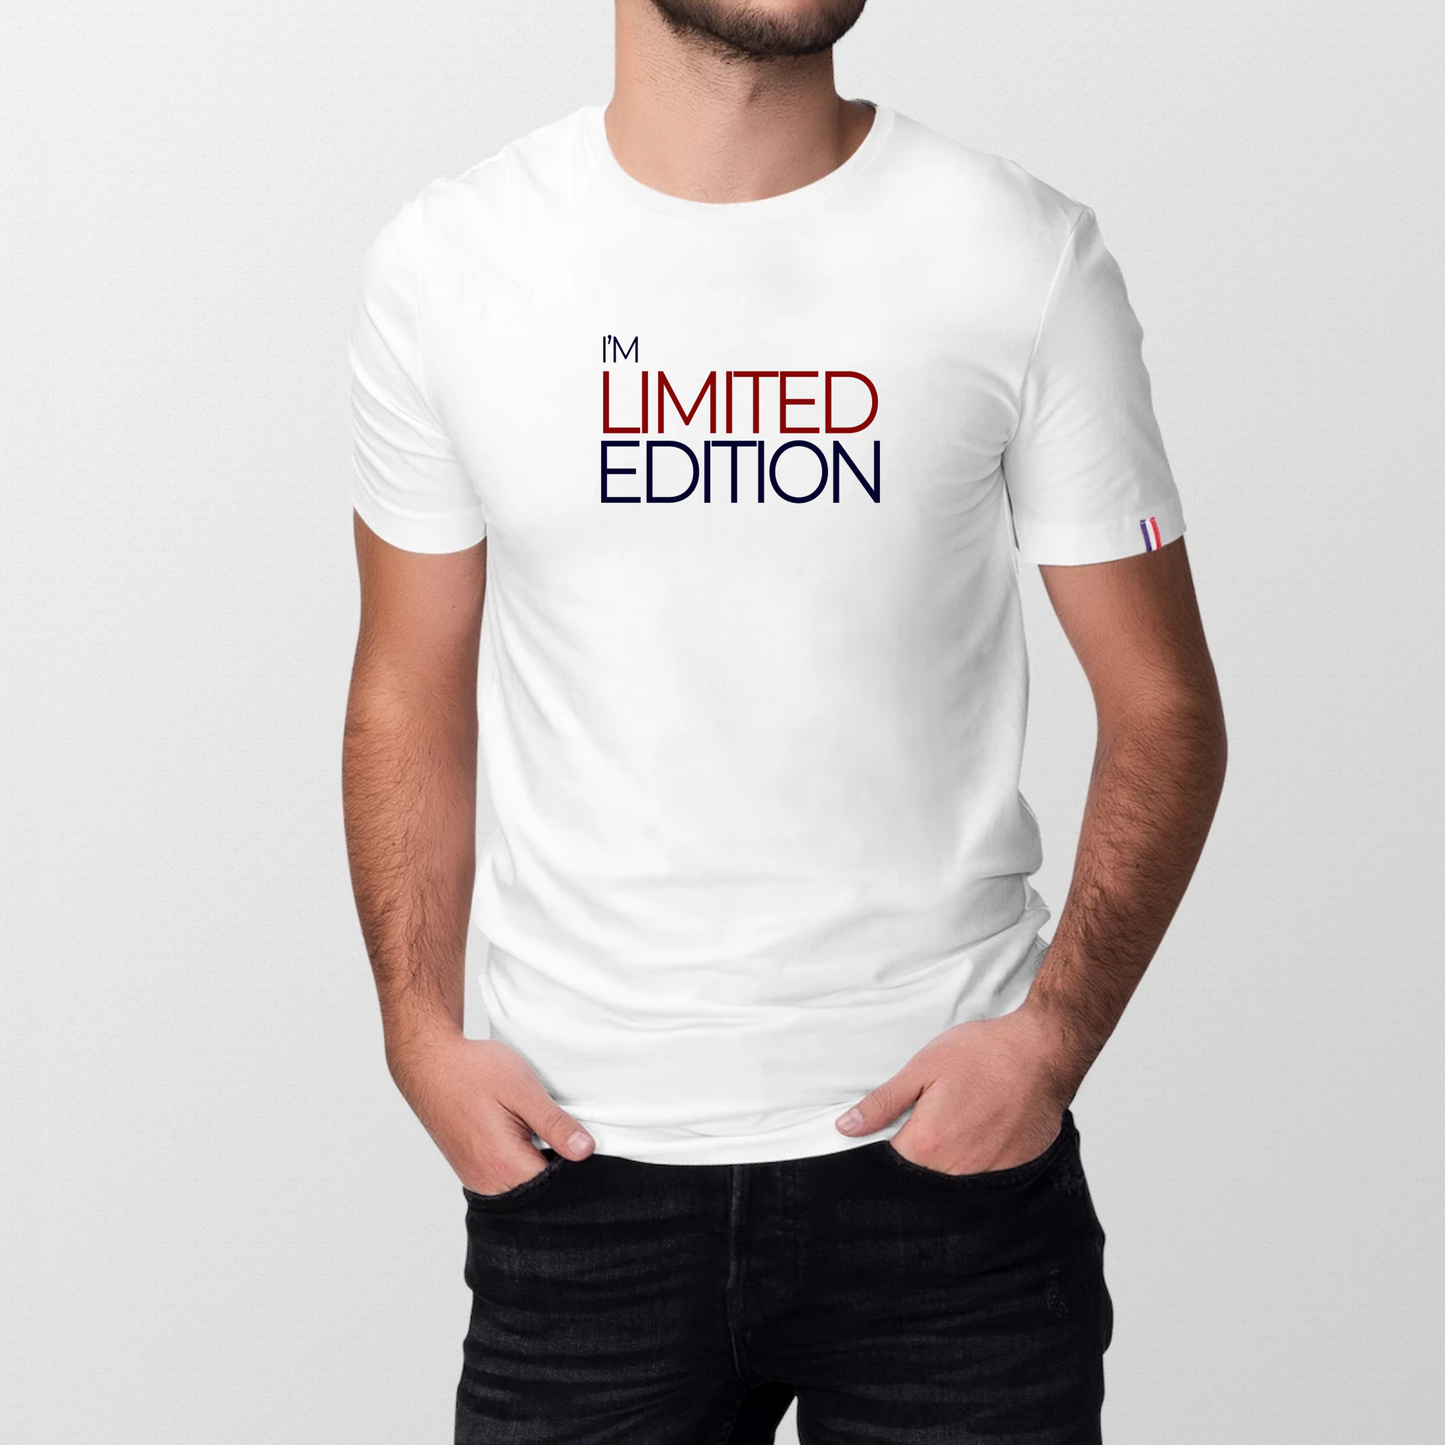 t-shirt Made in France homme en coton bio I'm Limited Edition de T-French, t-shirt homme made in France, t-shirt message fabriqué en France, t-shirt Origine France Garantie, t-shirt french, t-shirt french touch, t-shirt homme Blanc